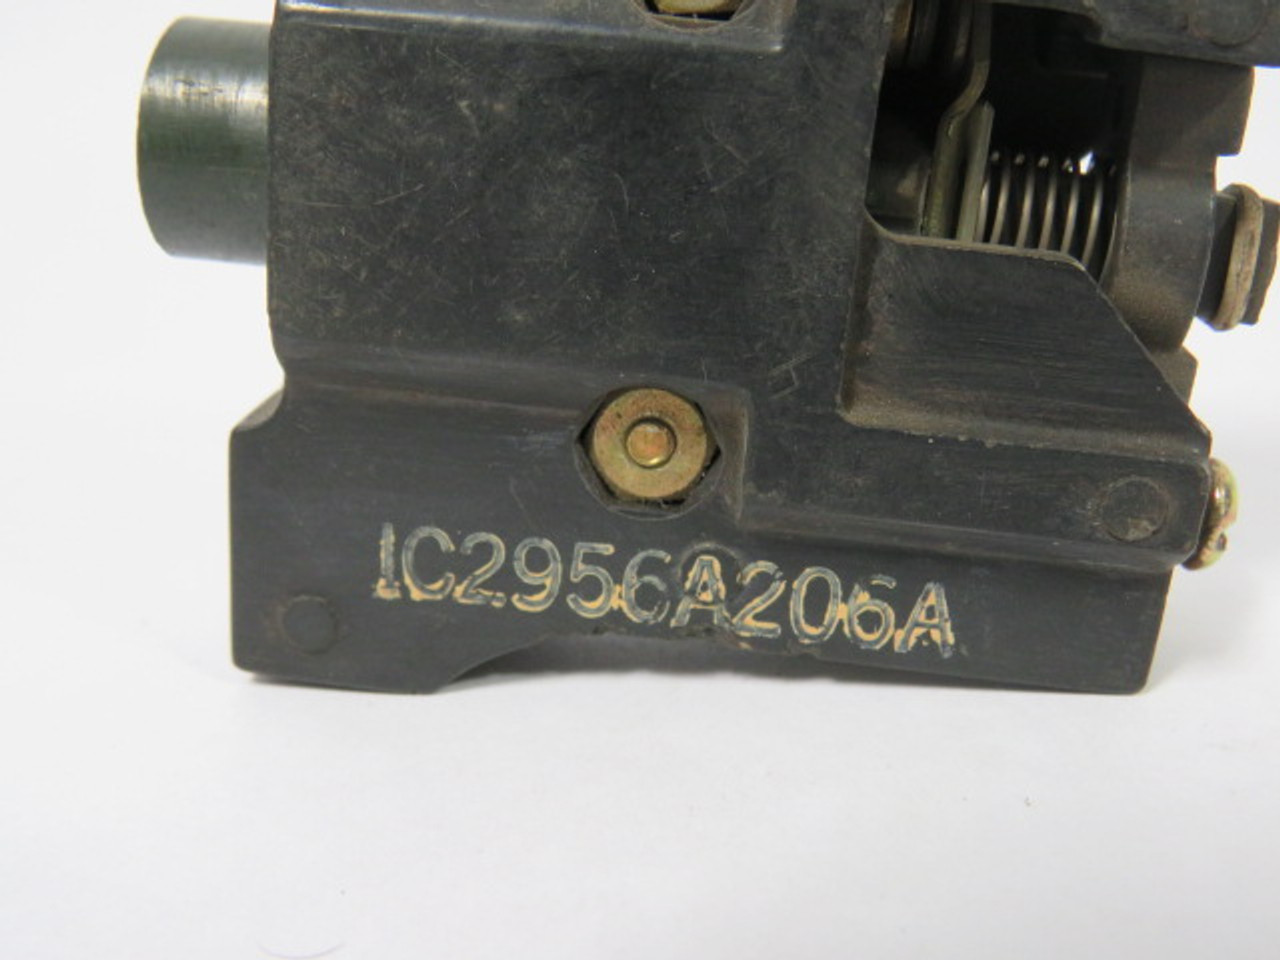 General Electric IC2956A206A Interlock Snap Action Contact Block USED